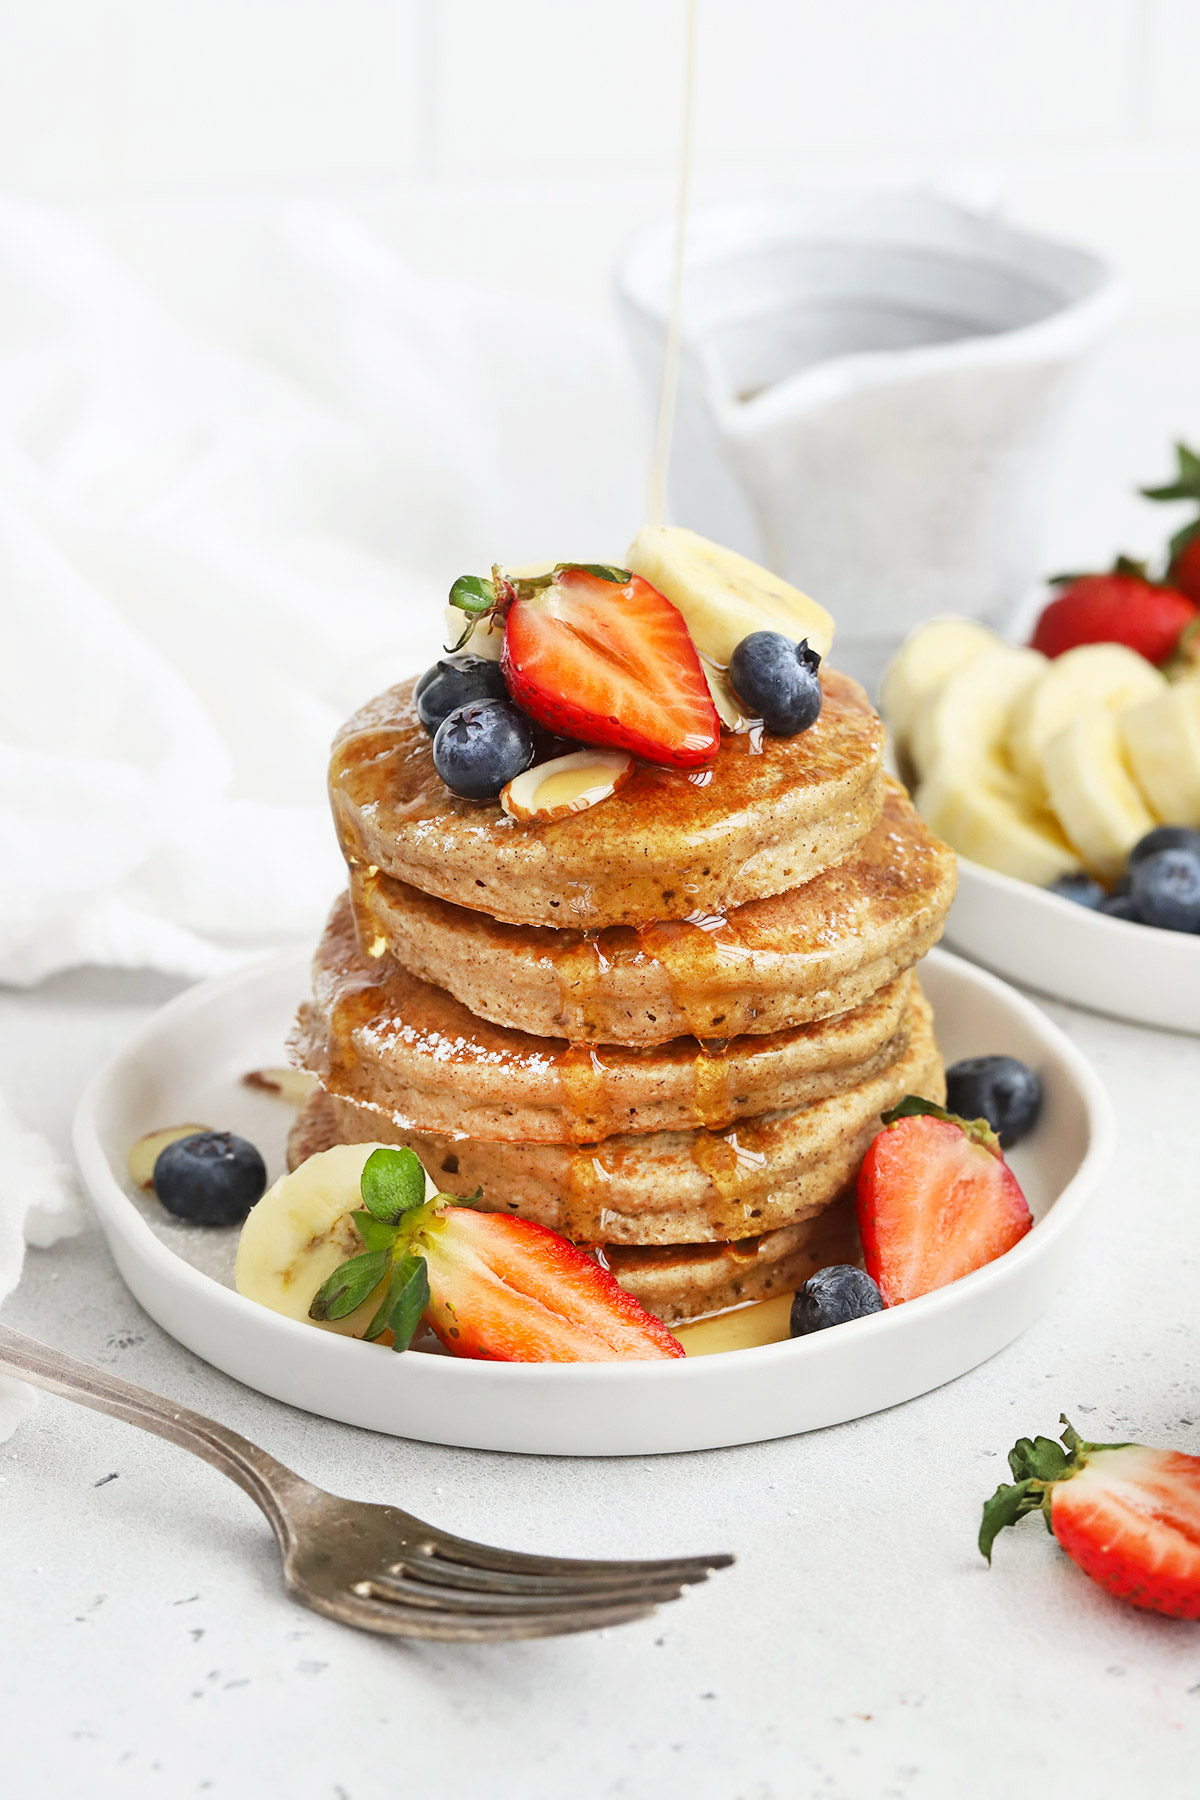 Front view of a stack of blender banana oatmeal pancakes topped with sliced bananas, fresh berries, and syrup.